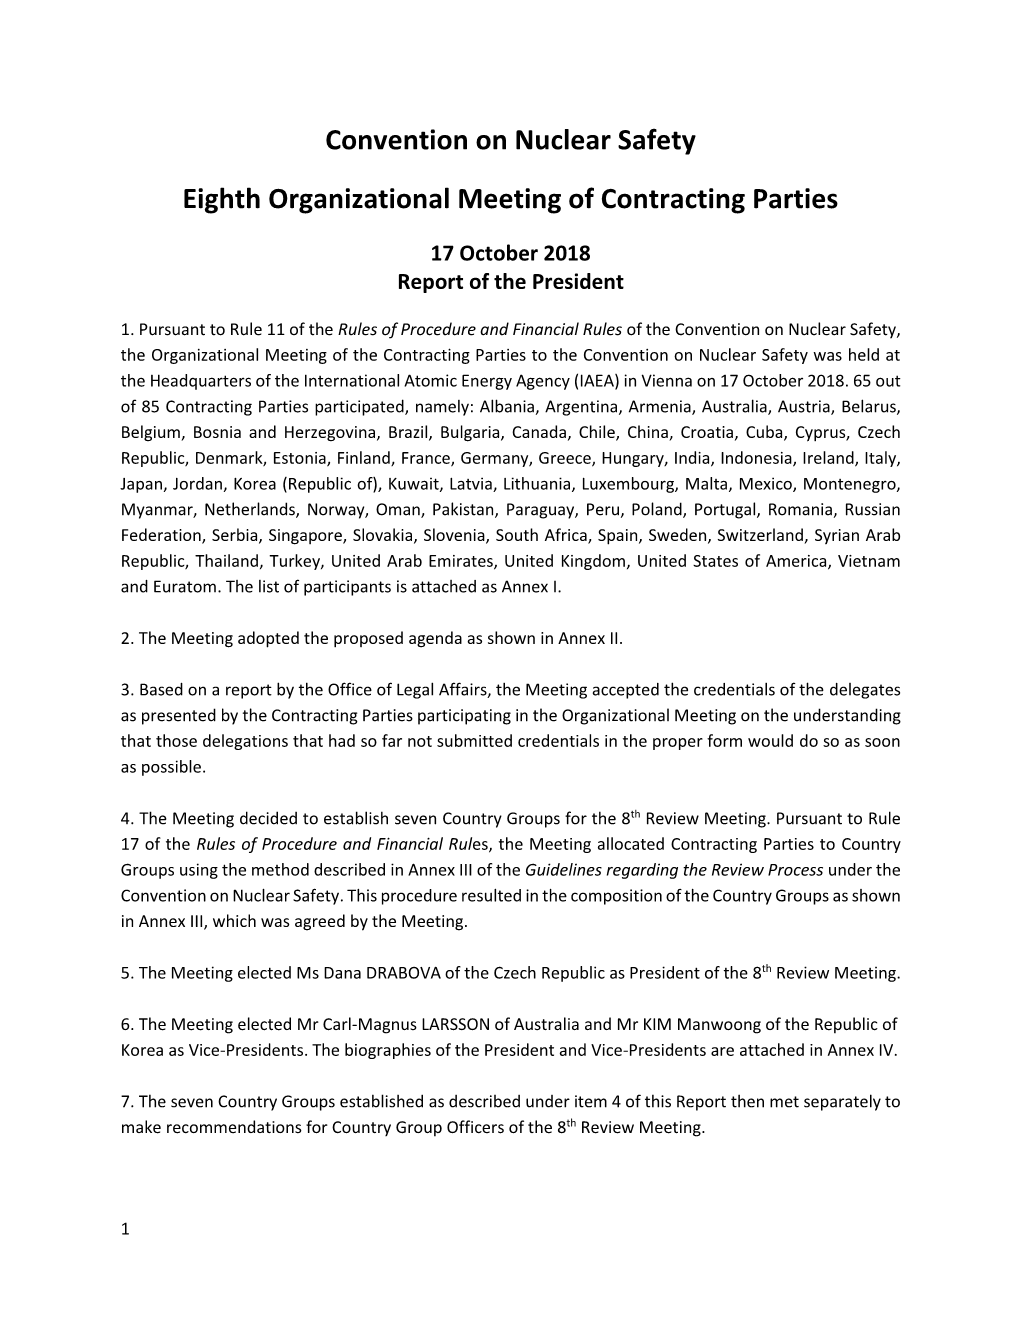 Convention on Nuclear Safety Eighth Organizational Meeting of Contracting Parties